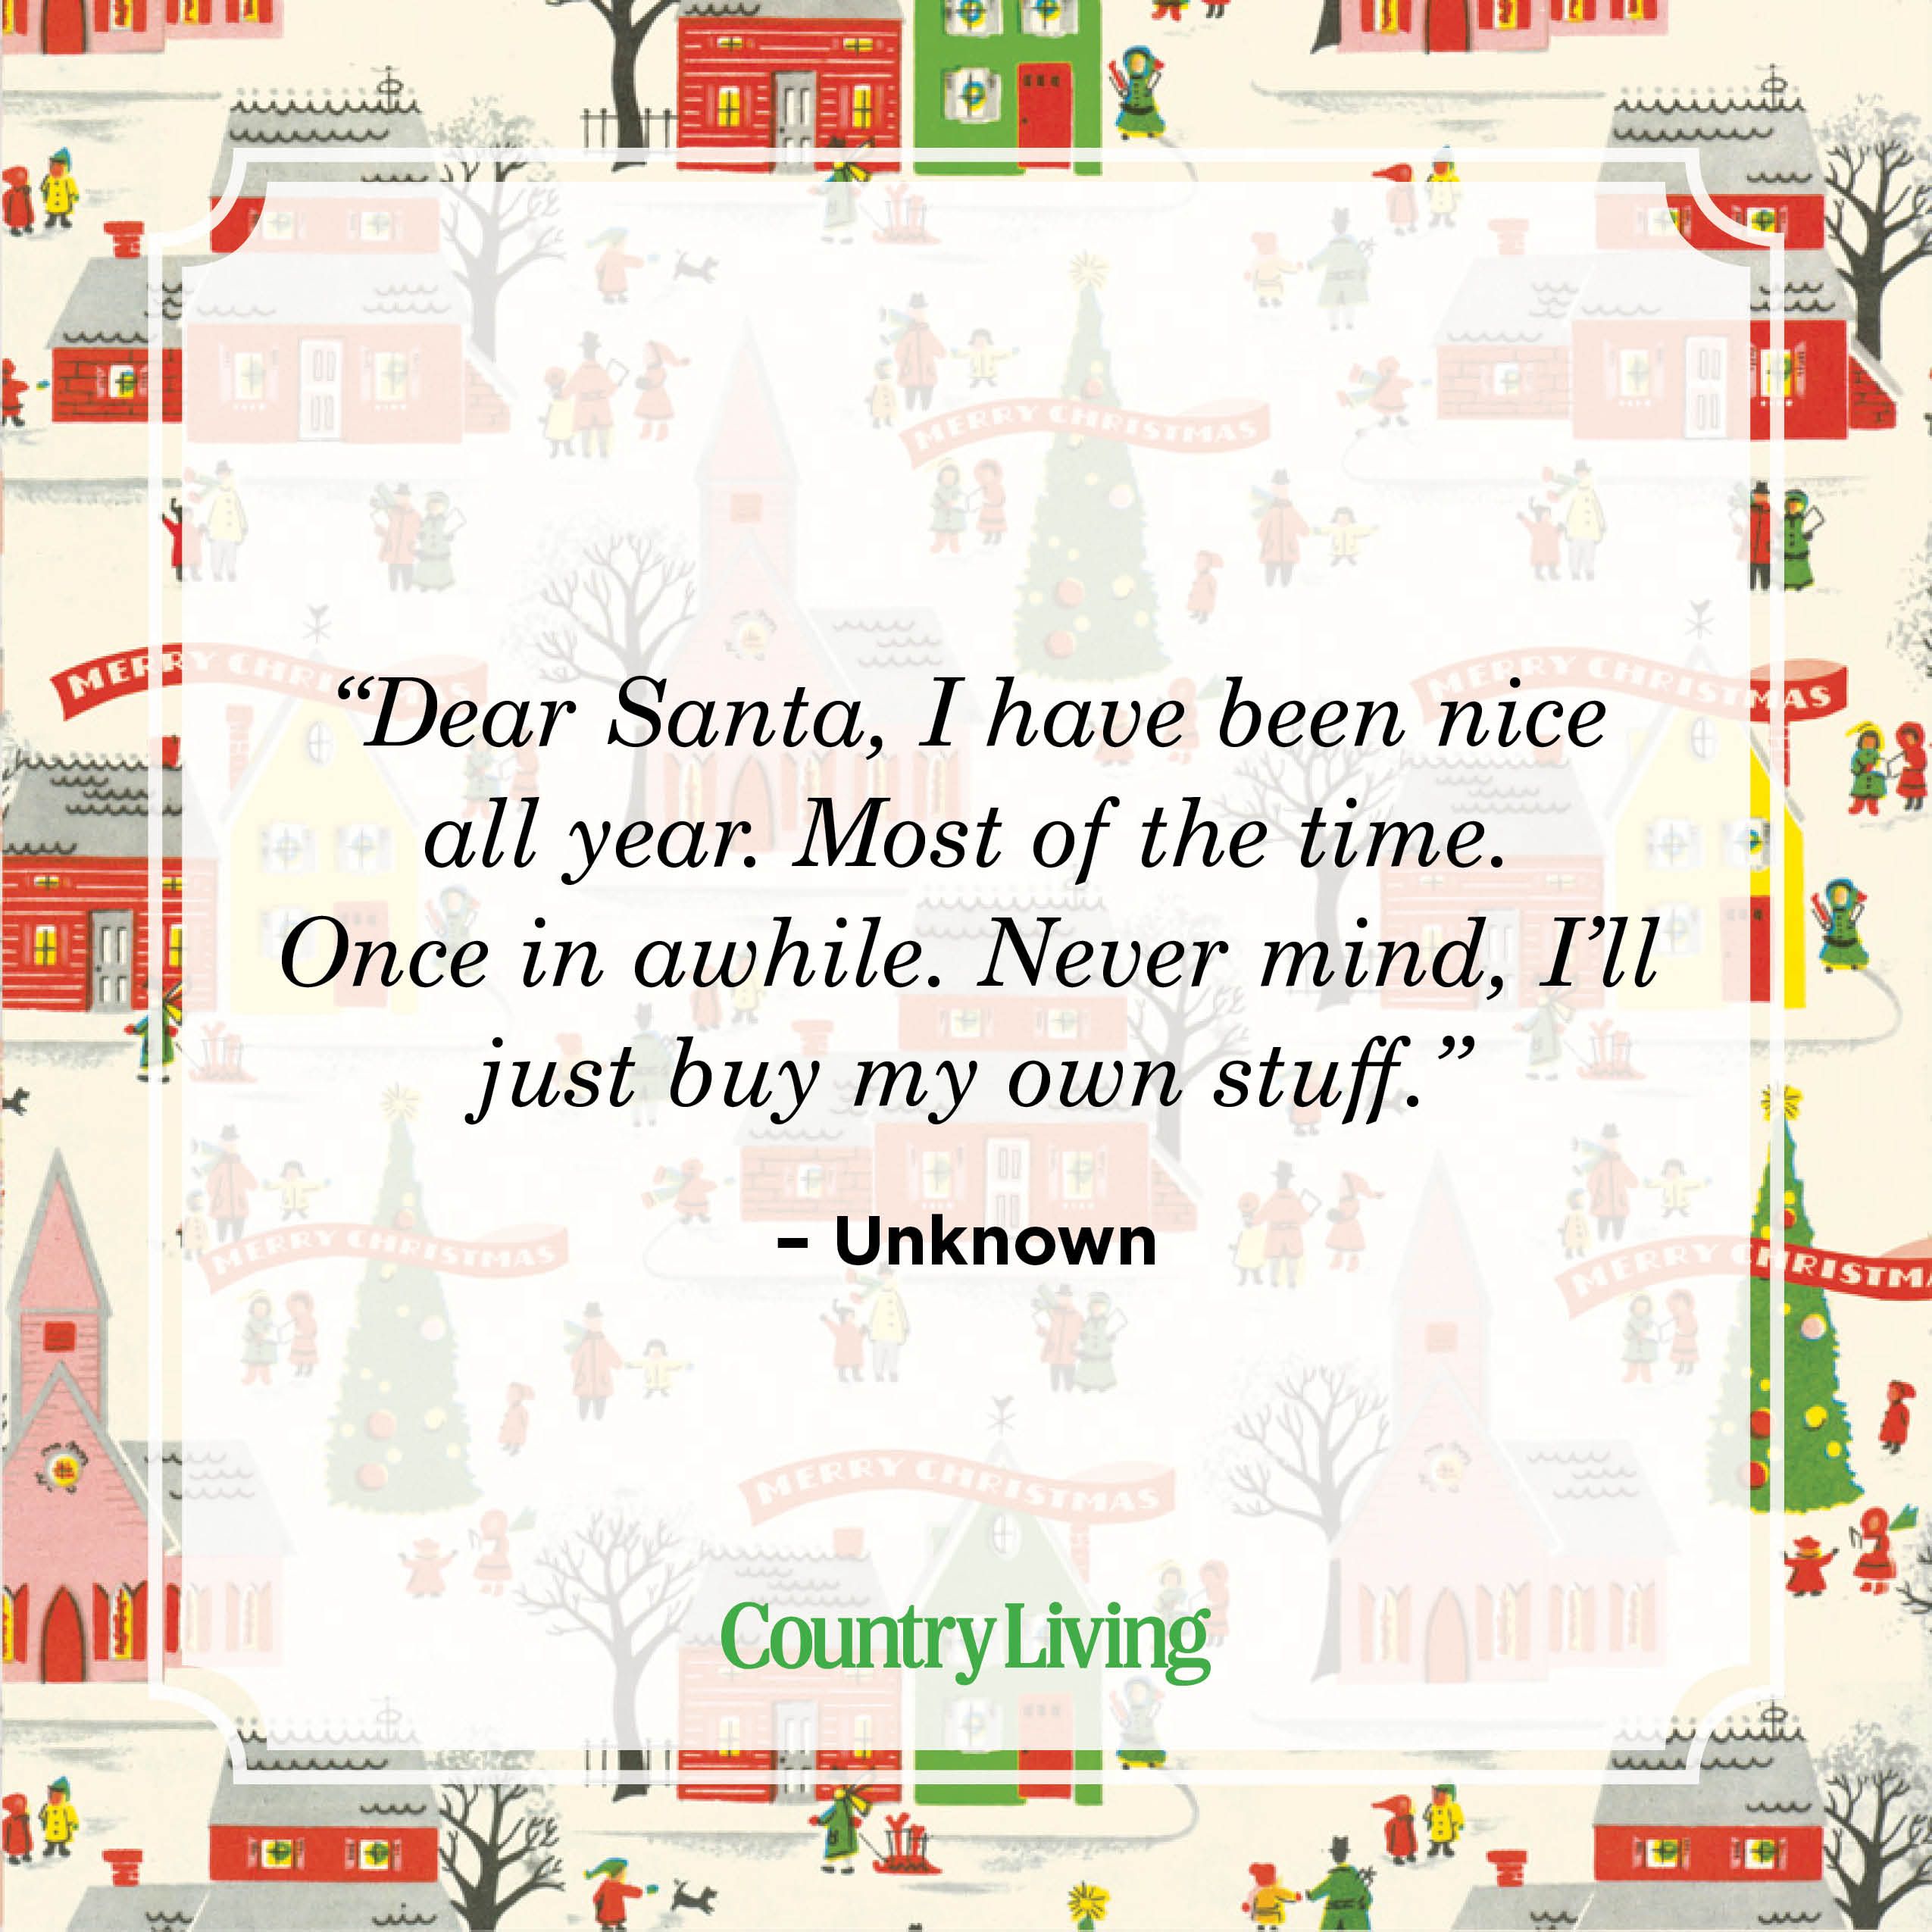 27 Best Santa Quotes Funny Santa Claus Quotes 2,669 likes · 89 talking about this · 100 were here. 27 best santa quotes funny santa